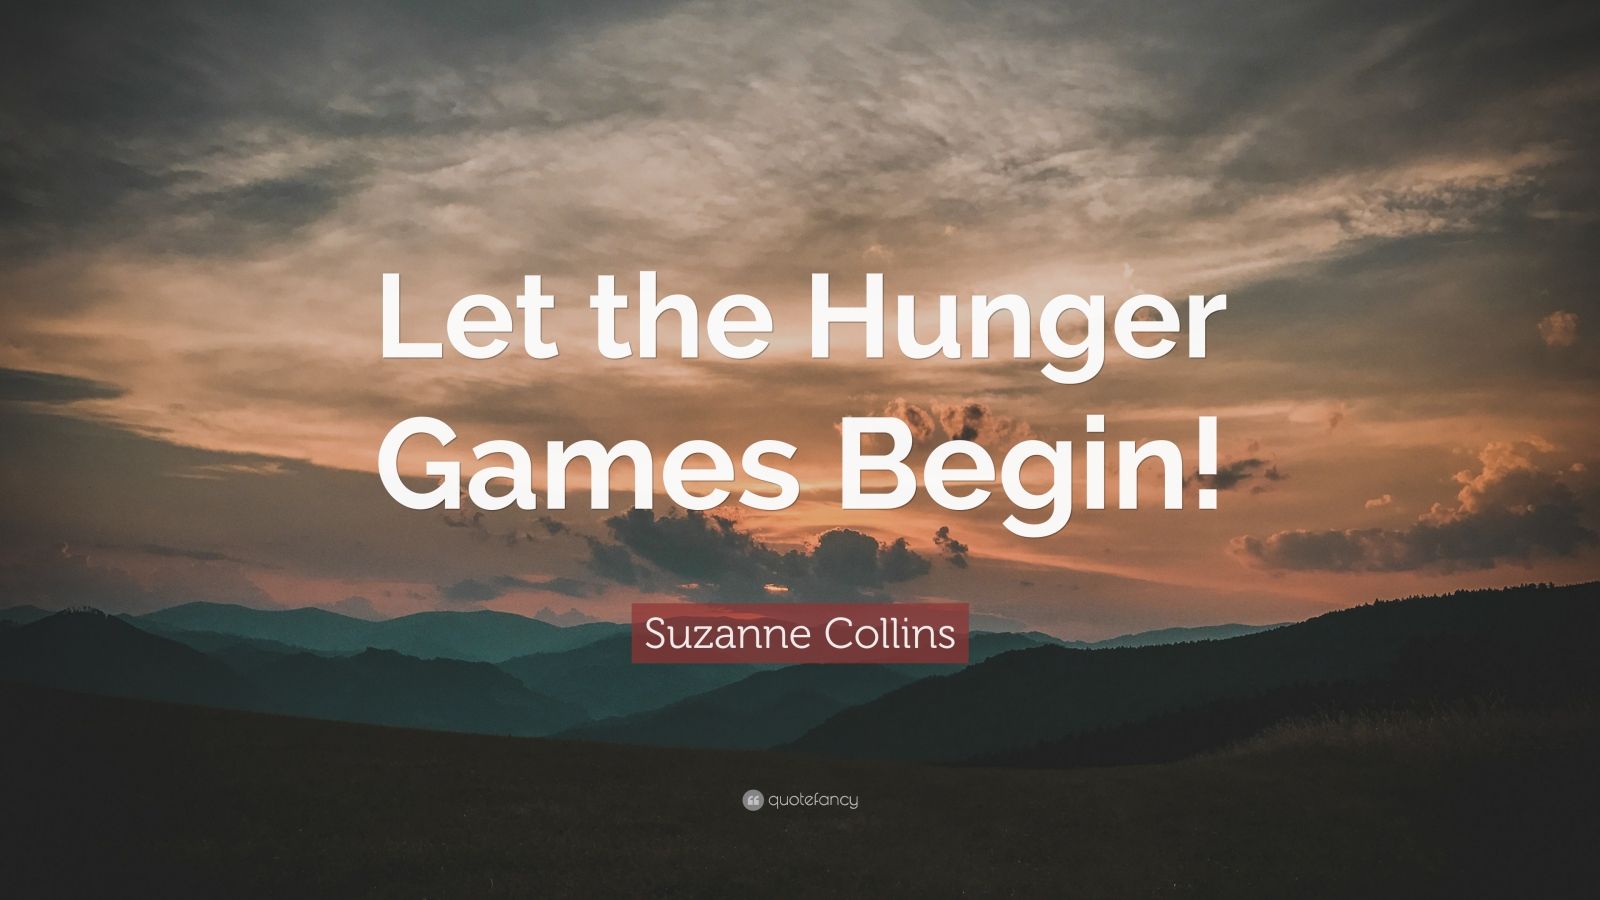 Suzanne Collins Quote “let The Hunger Games Begin ” 6